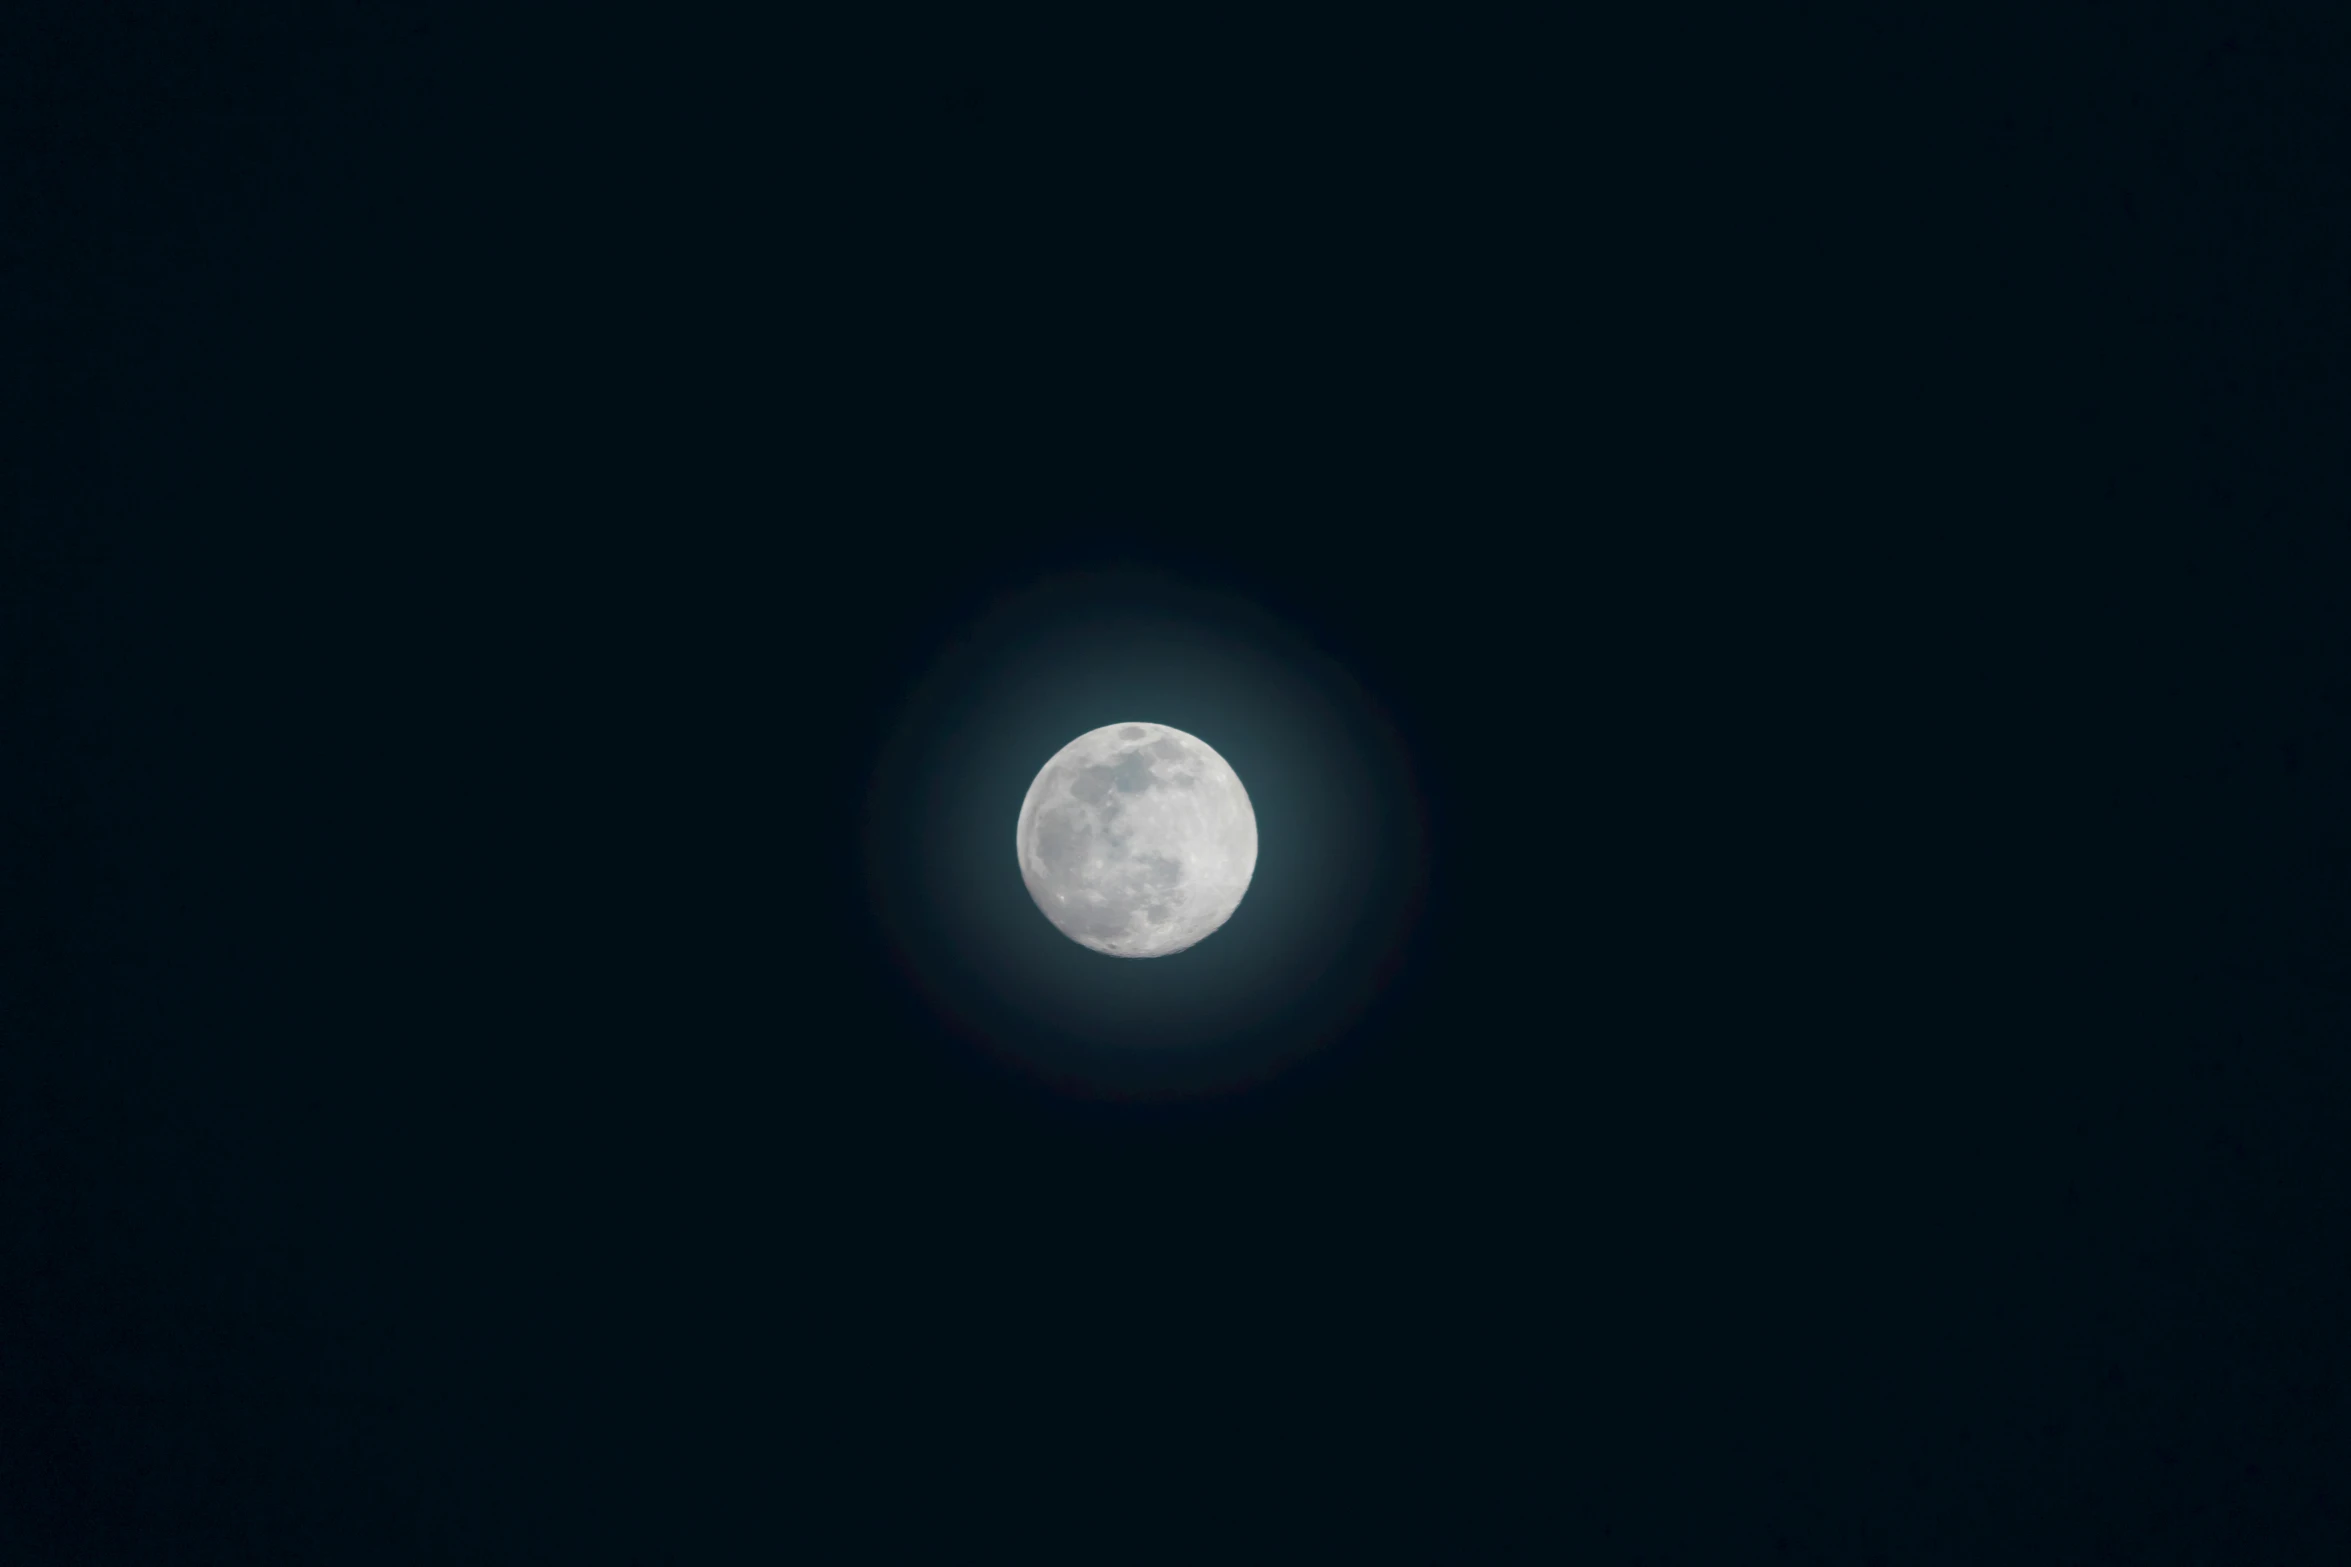 the moon is shining brightly in the dark sky, an album cover, pexels, minimalism, ☁🌪🌙👩🏾, atmospheric full moon, silver, phosphorescent